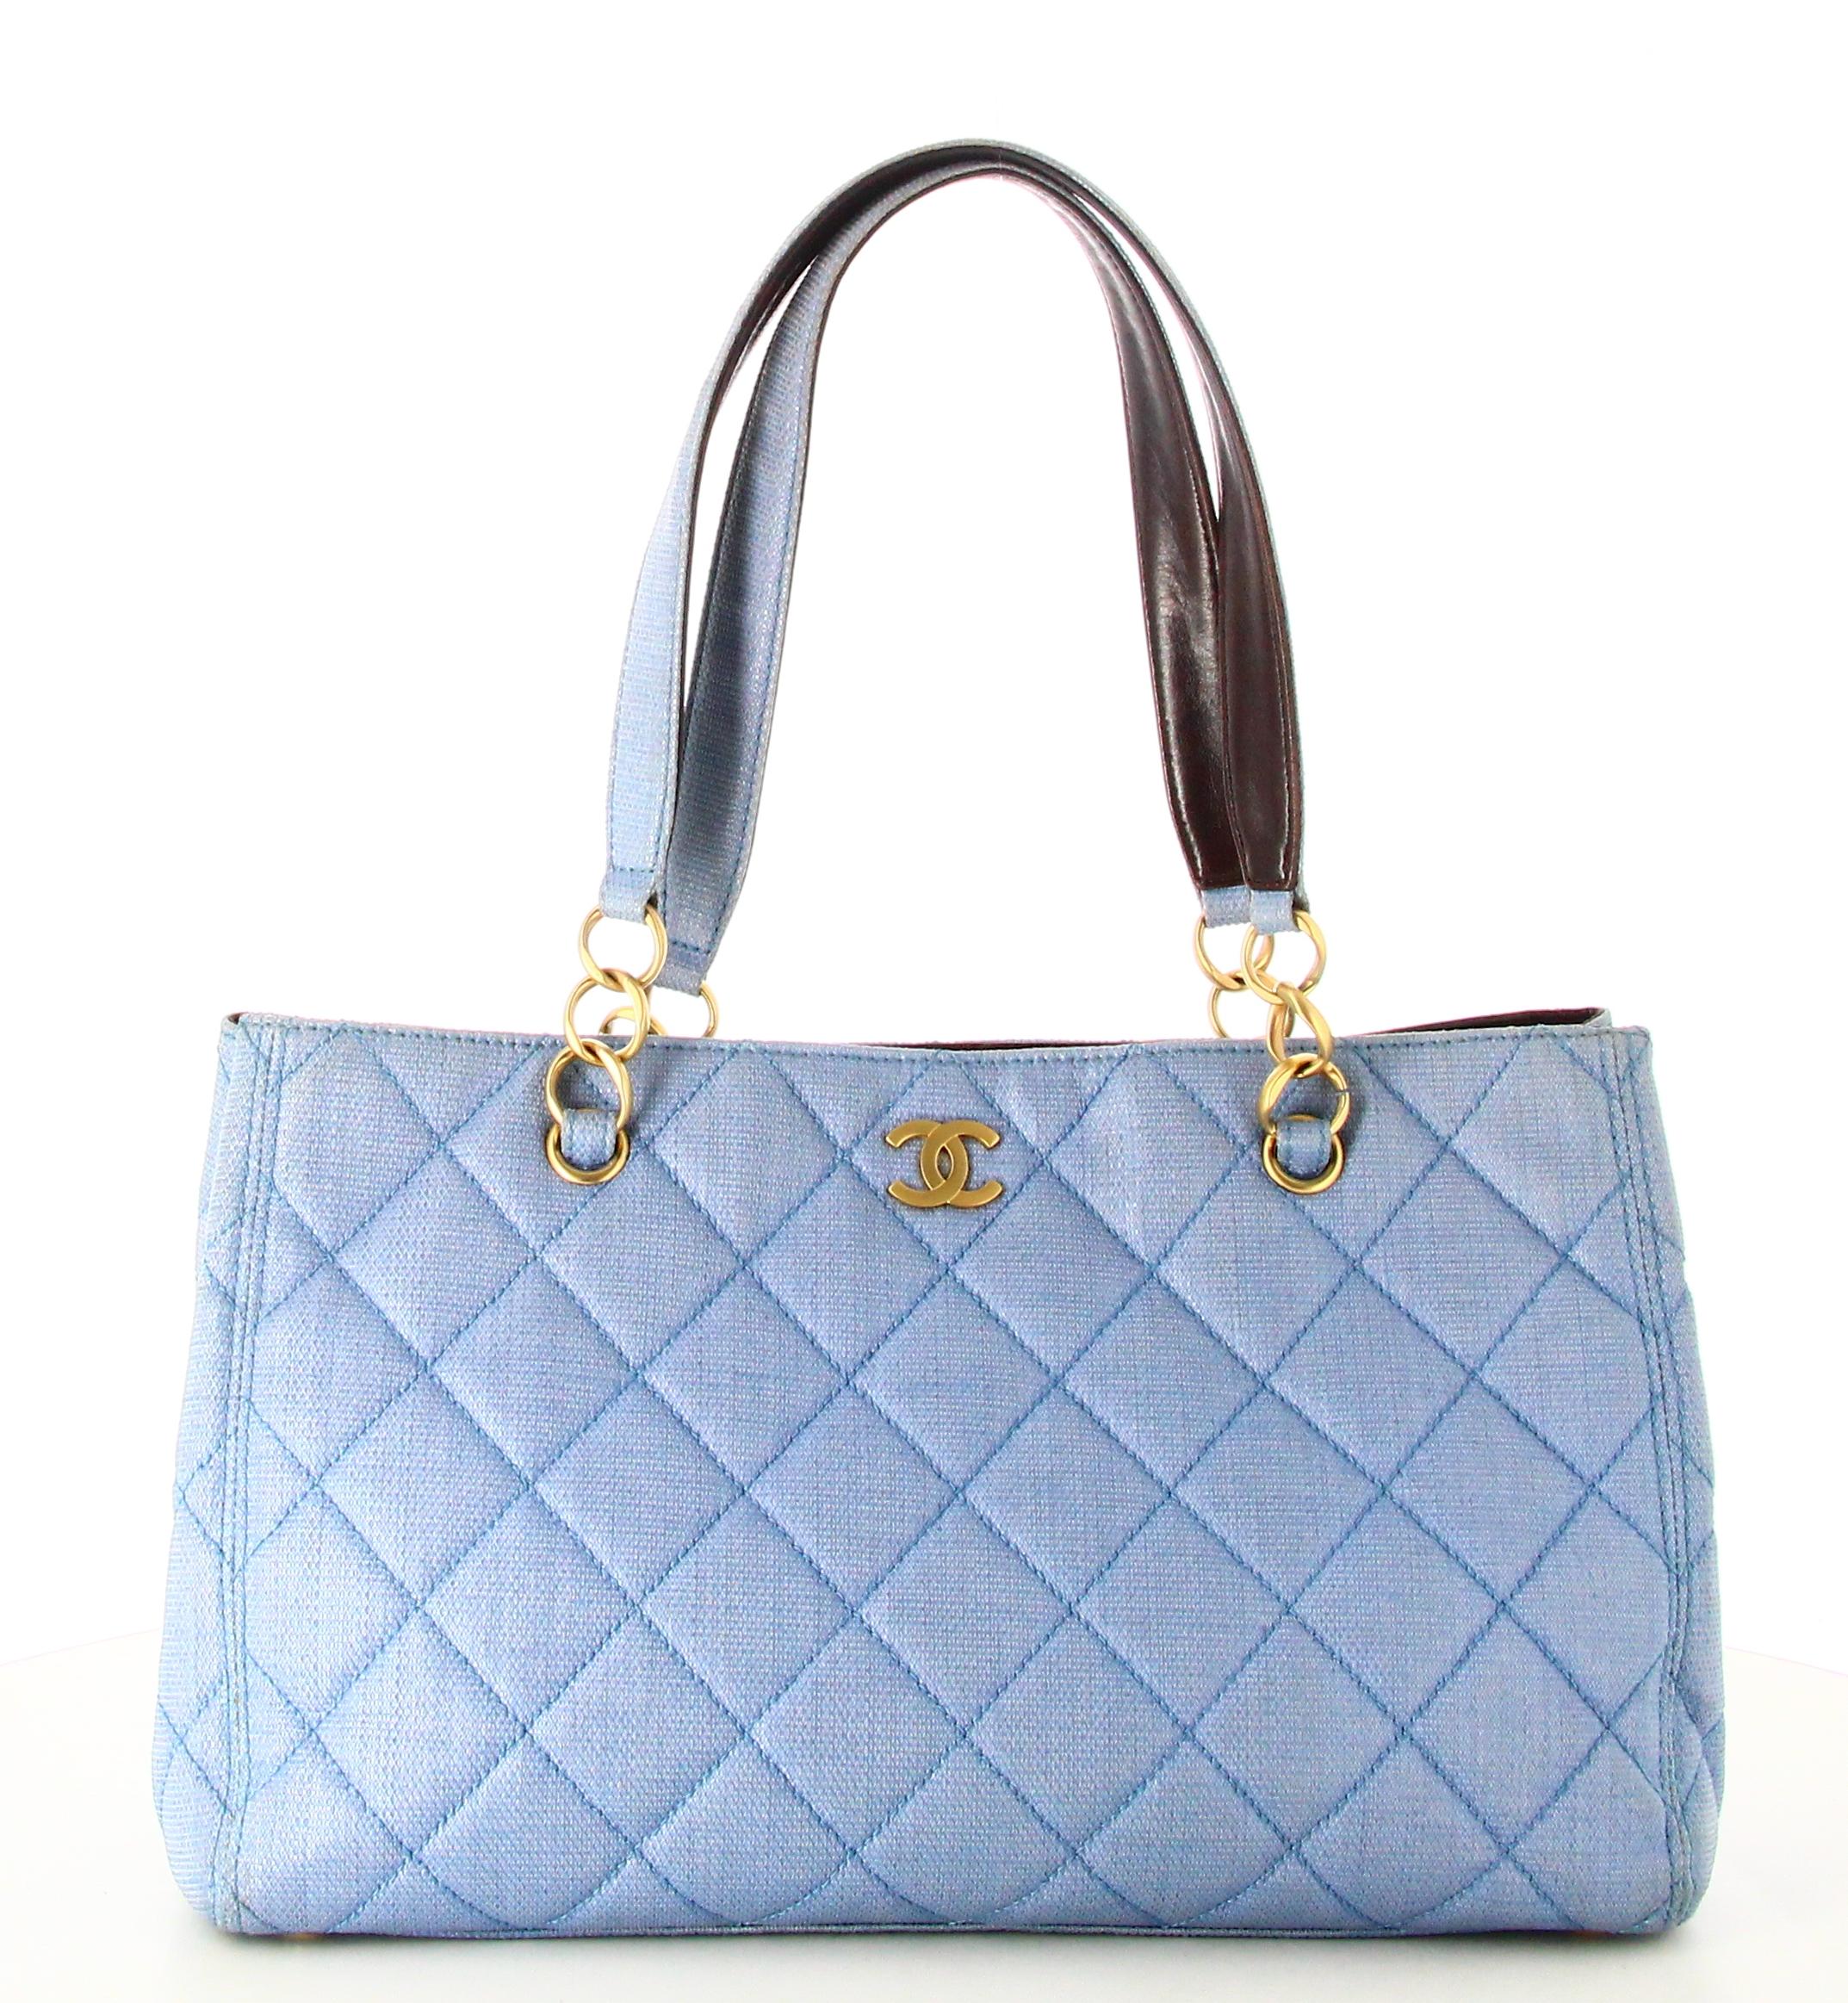 2003 Chanel Quilted Handbag Sky Blue 

- Good condition. Shows slight signs of wear over time.
- Chanel Handbag 
- Quilted fabric
- Two small straps 
- Inside: brown logo lining